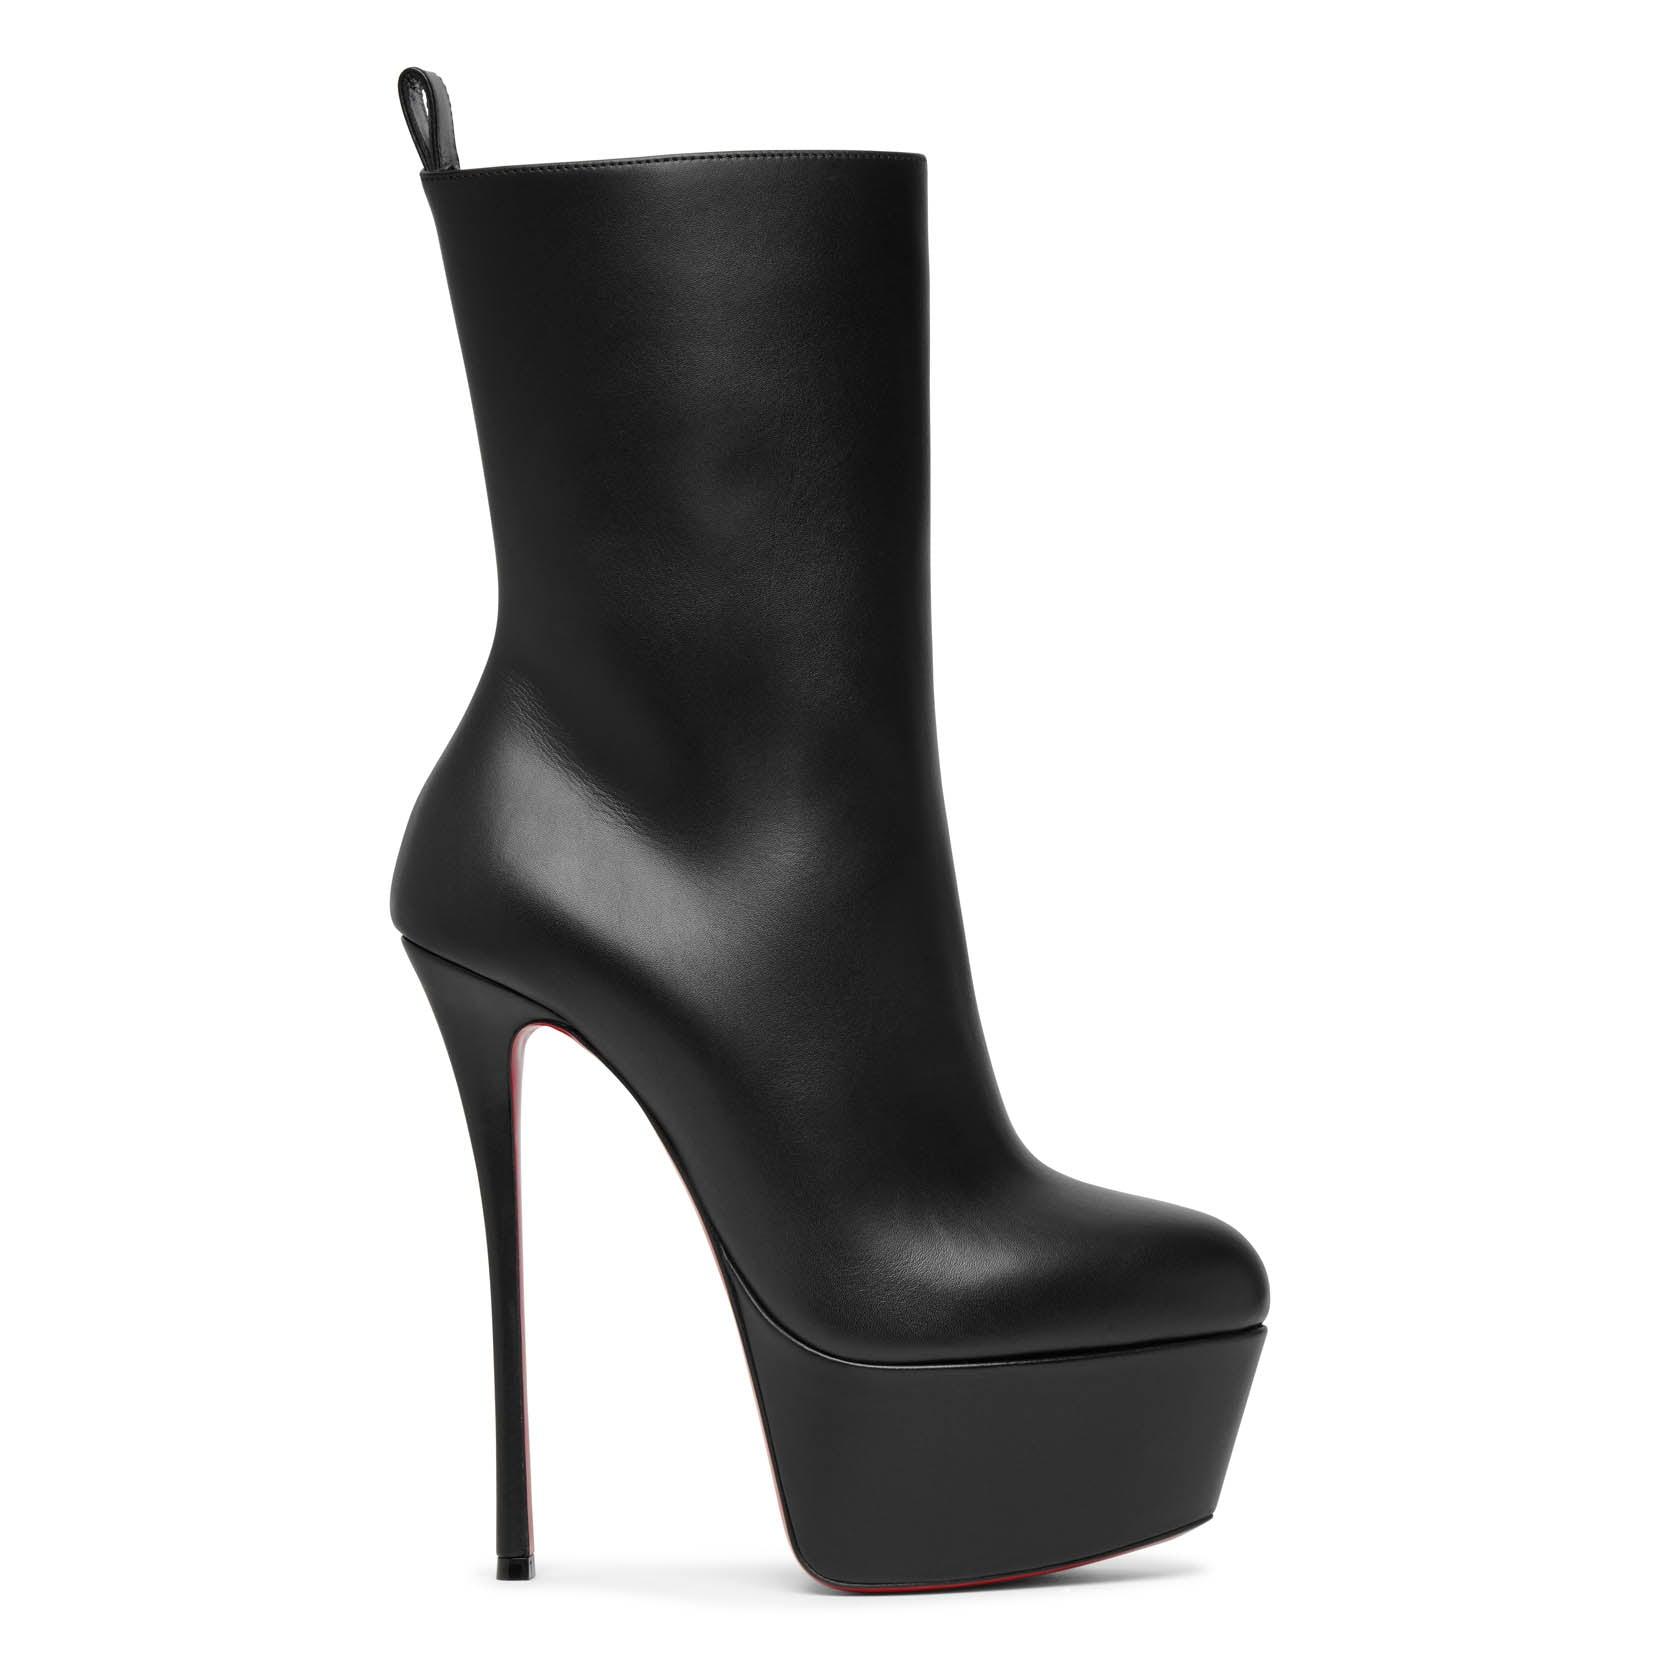 Christian Louboutin Dolly Black 160 Platform Leather Boots | Lyst